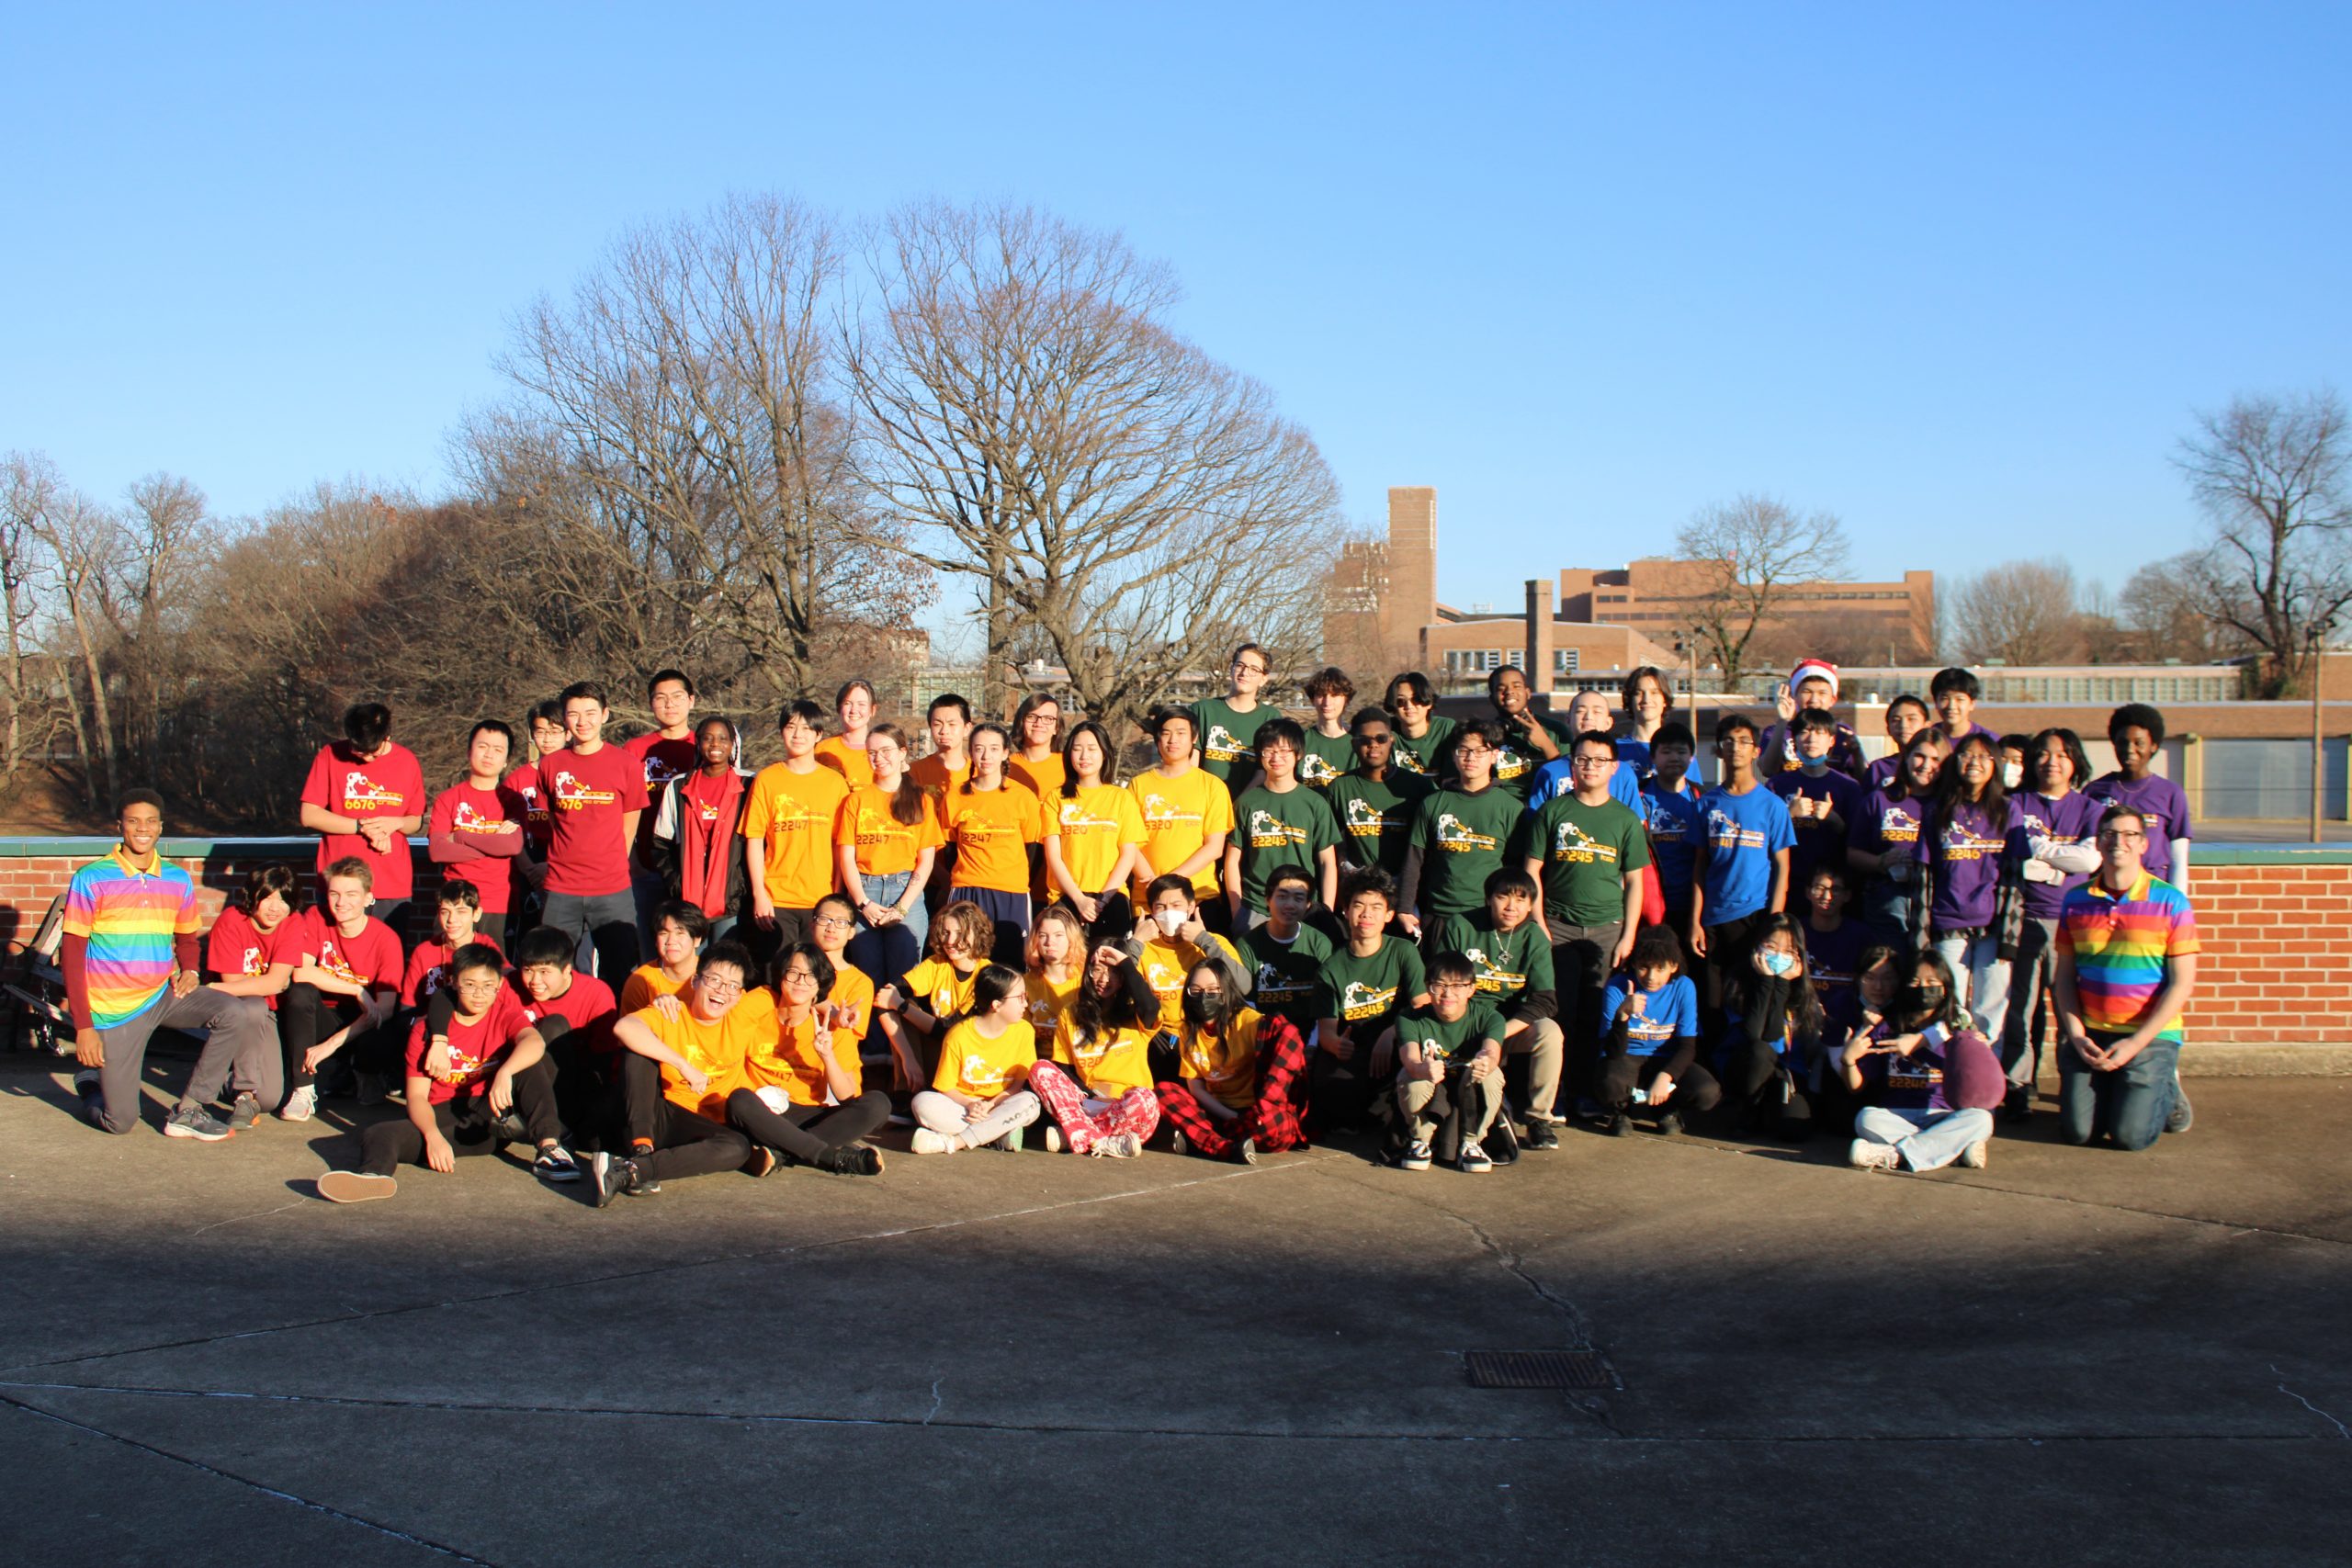 All 6 FTC Teams outside arranged like a rainbow in their team shirts.